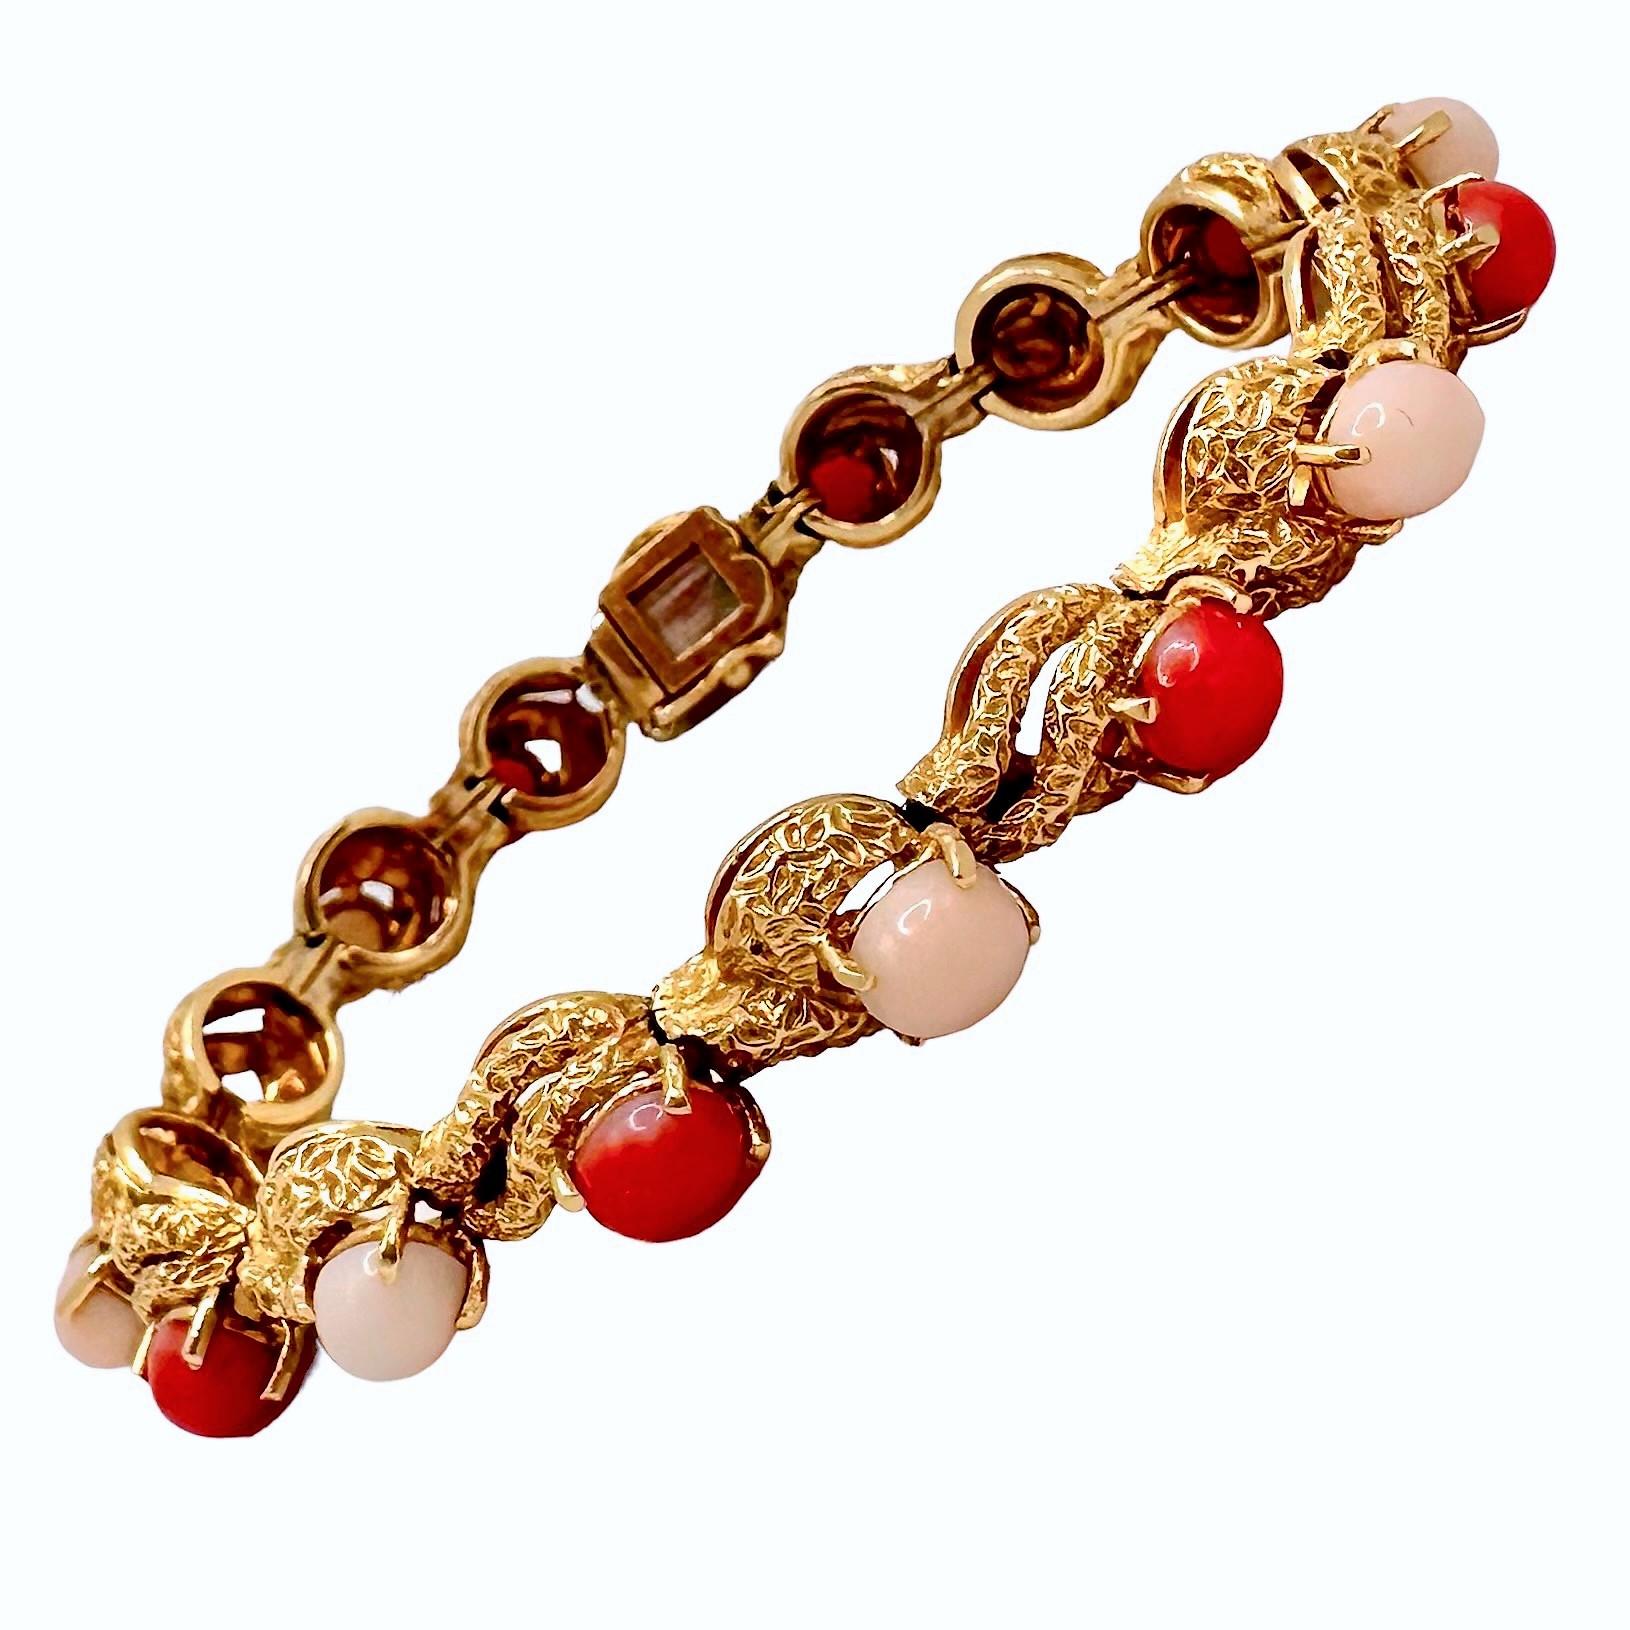 A colorful American made casual bracelet that is set with sixteen alternating bright orange and Angel Skin coral cabochons, each measuring 6mm x 5mm. This stylish bracelet has enough of a presence to stand alone, or can be stacked with other narrow